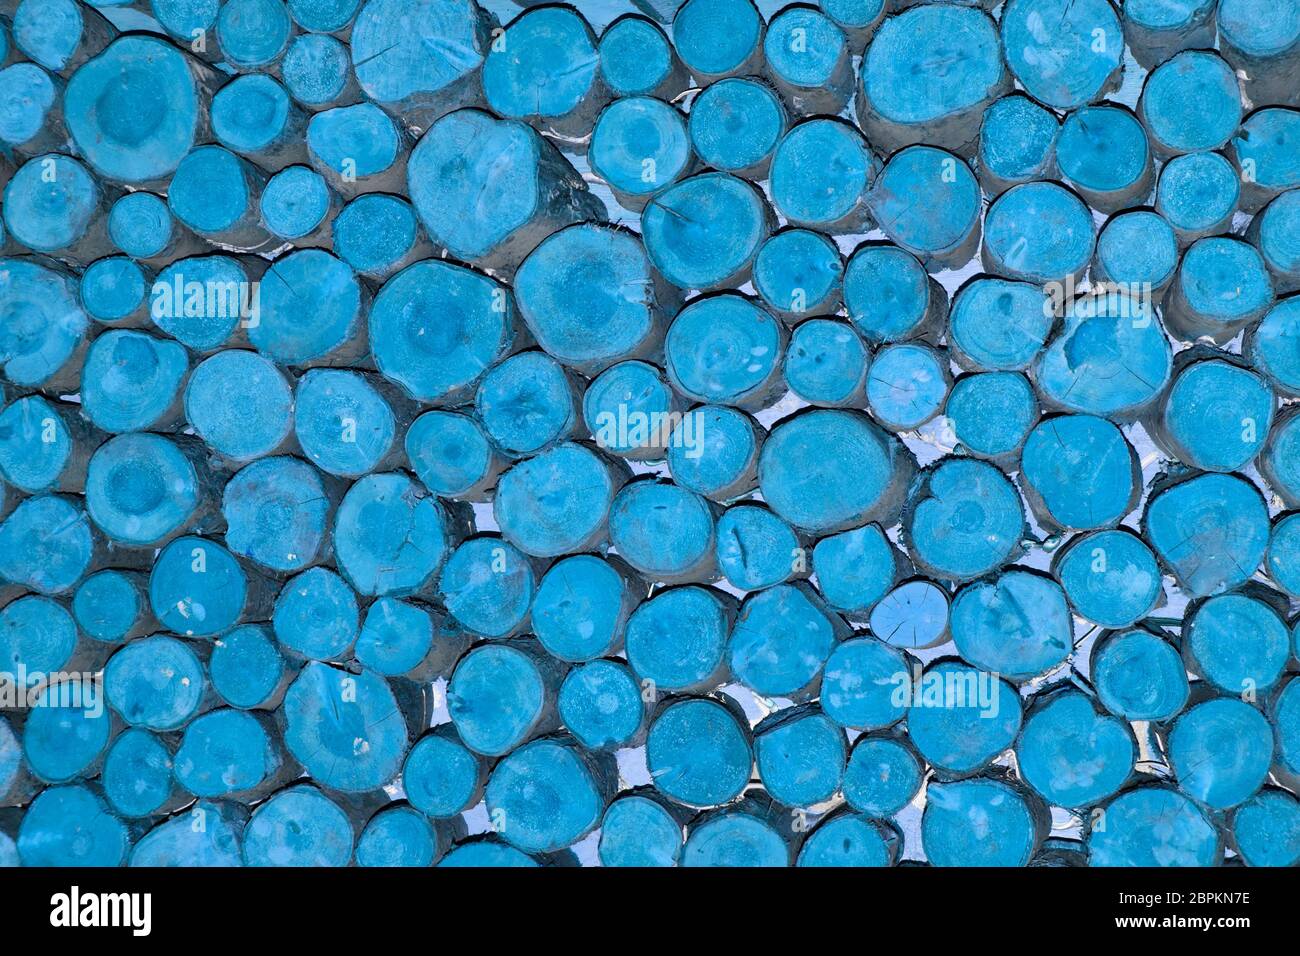 Abstract background pattern image manipulated blue colour applied to ends of stacked short lengths random diameter round sawn timber logs England UK Stock Photo